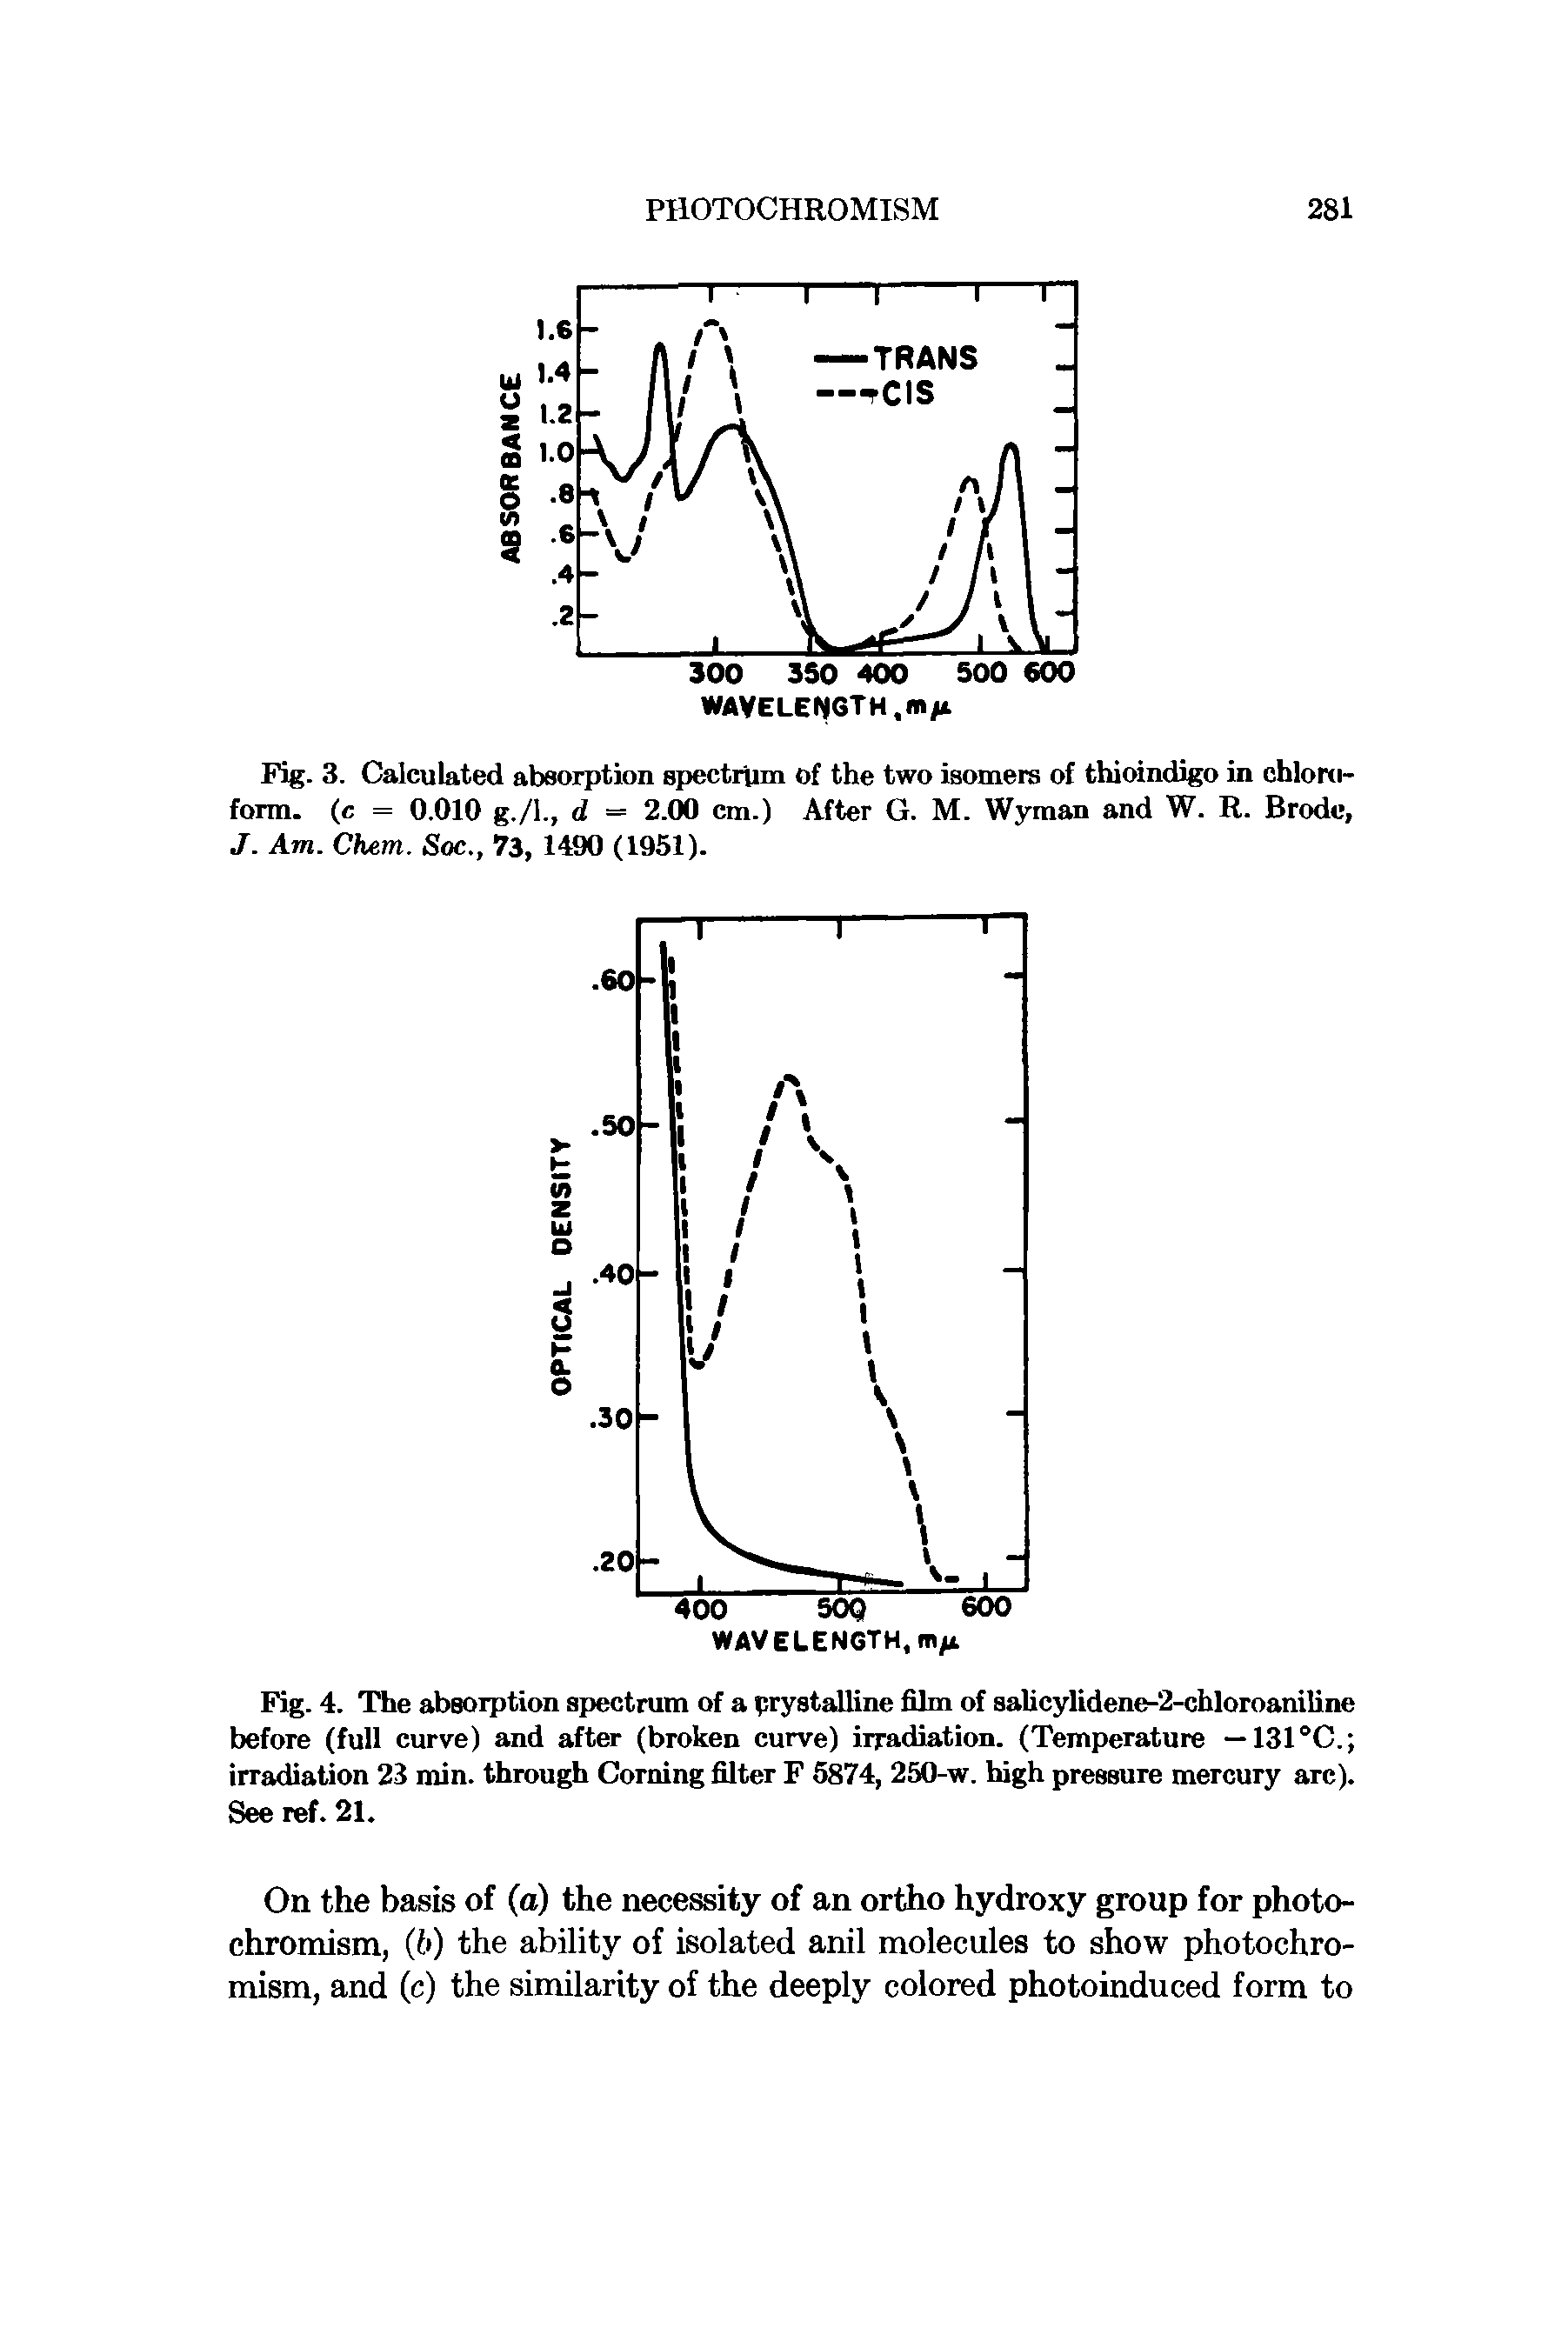 Fig. 4. The absorption spectrum of a crystalline film of salicylidene-2-chloroaniline before (full curve) and after (broken curve) irradiation. (Temperature —131 °C. irradiation 23 min. through Corning filter F 5874, 250-w. high pressure mercury arc). See ref. 21.